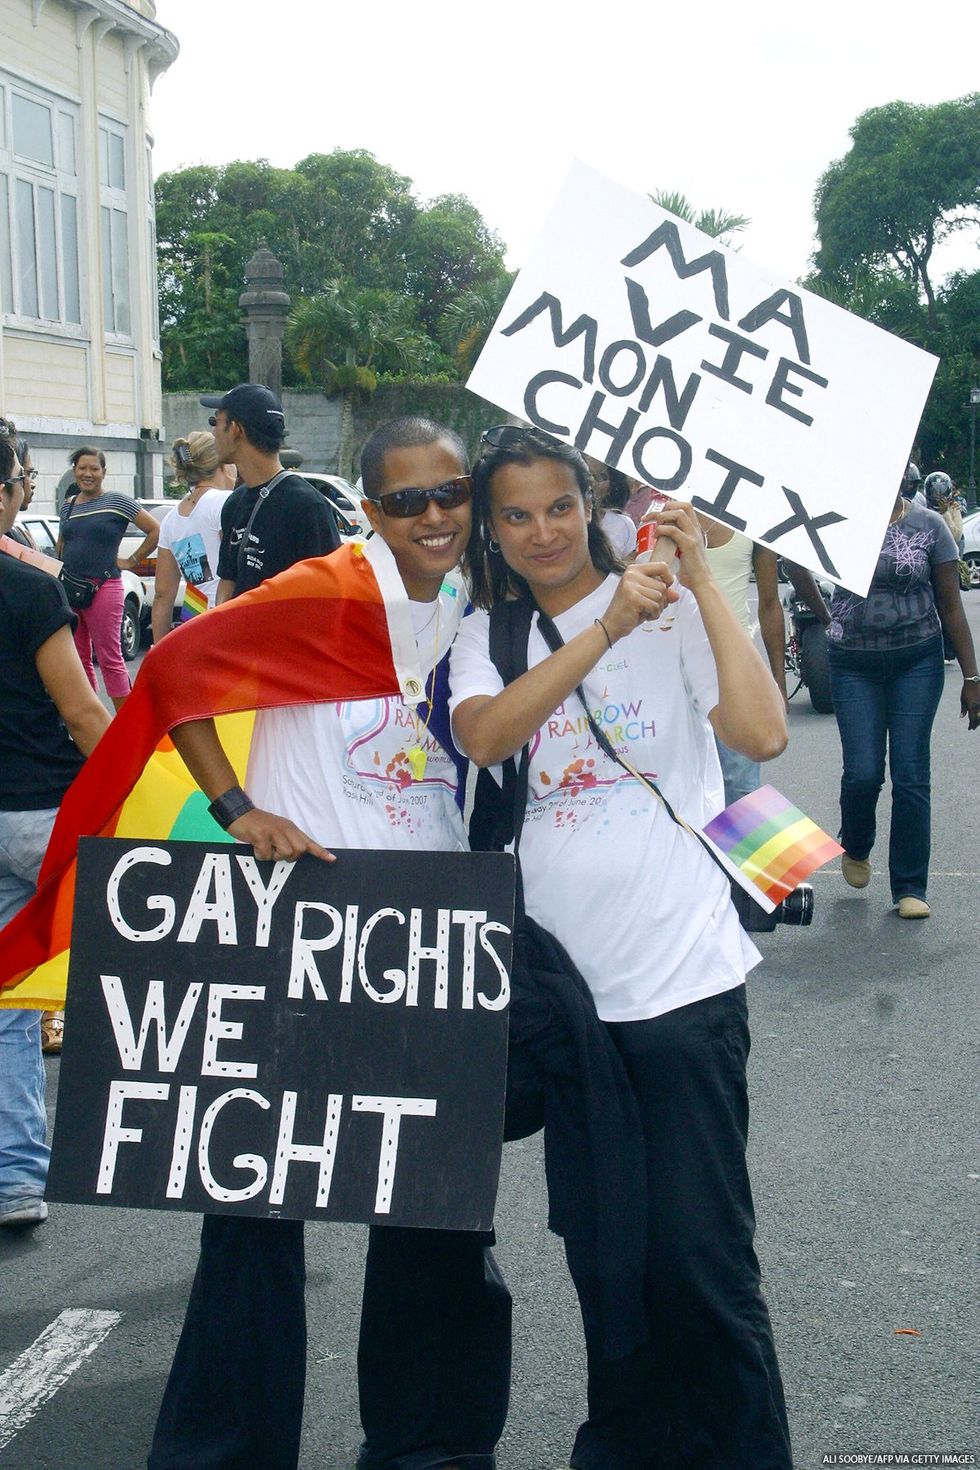 People standing in the street with signs protesting for gay rights